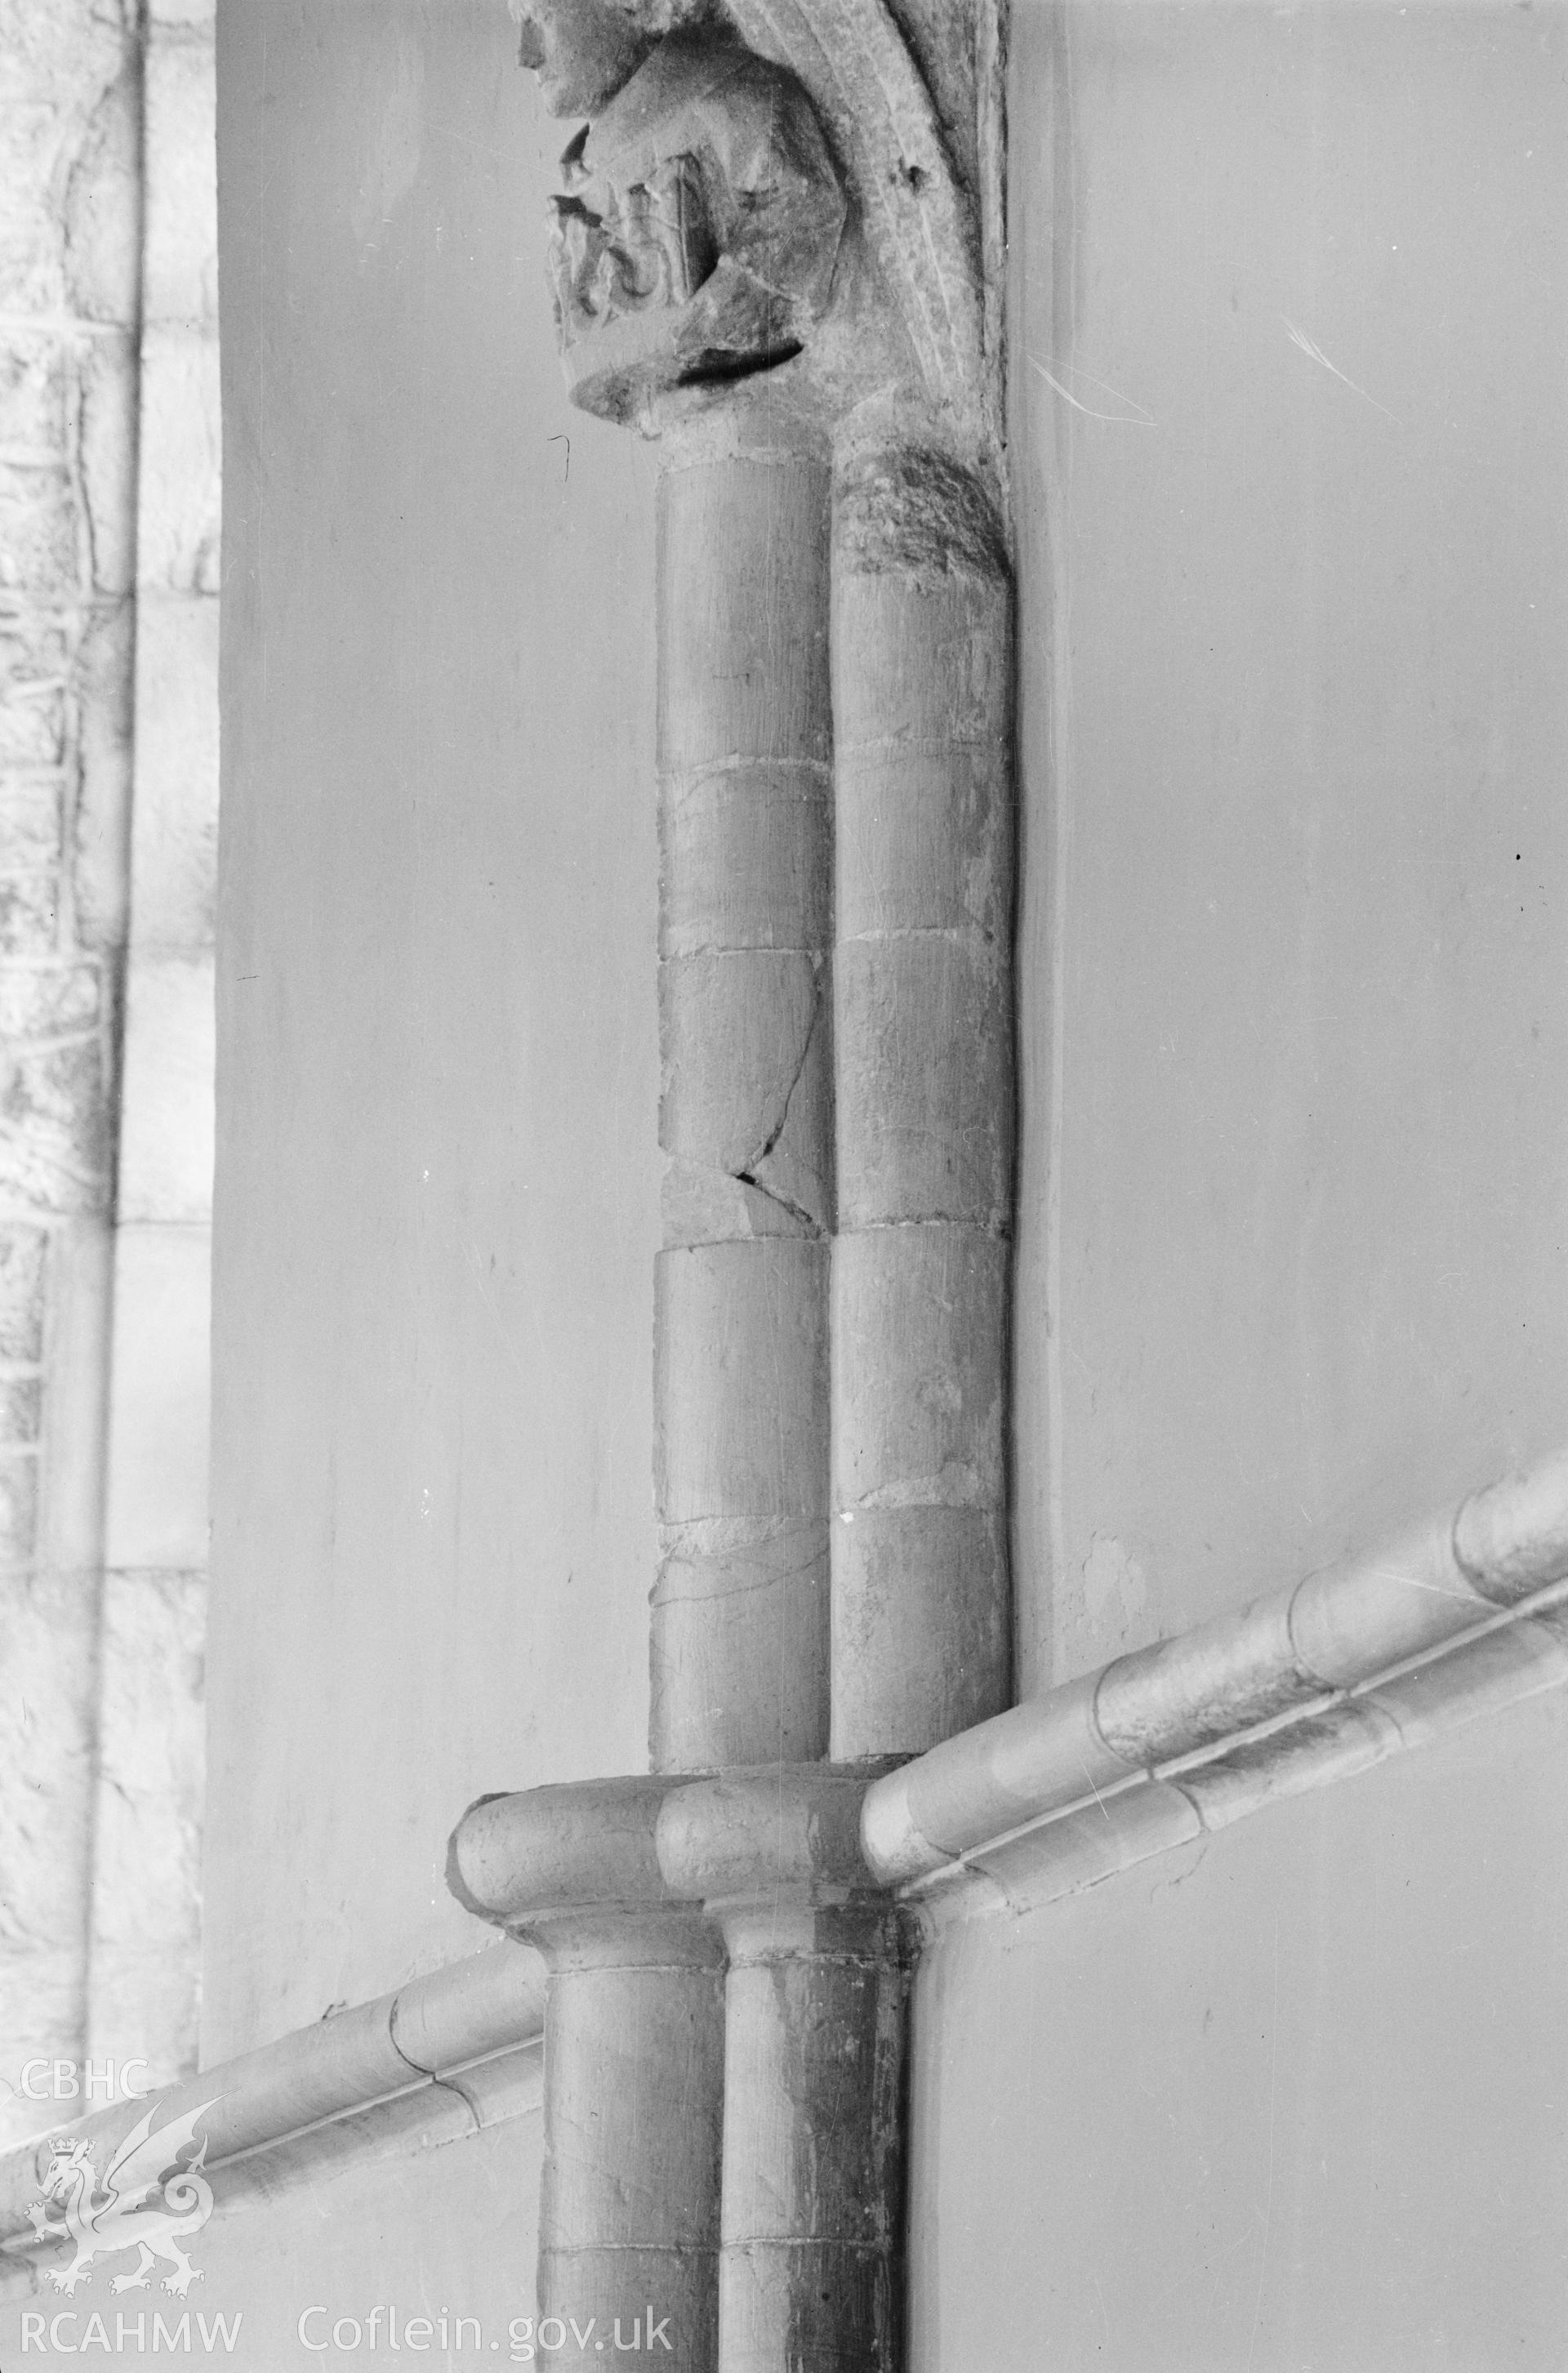 Digital copy of a black and white nitrate negative showing interior stonework decoration at St. David's Cathedral, taken by E.W. Lovegrove, July 1936